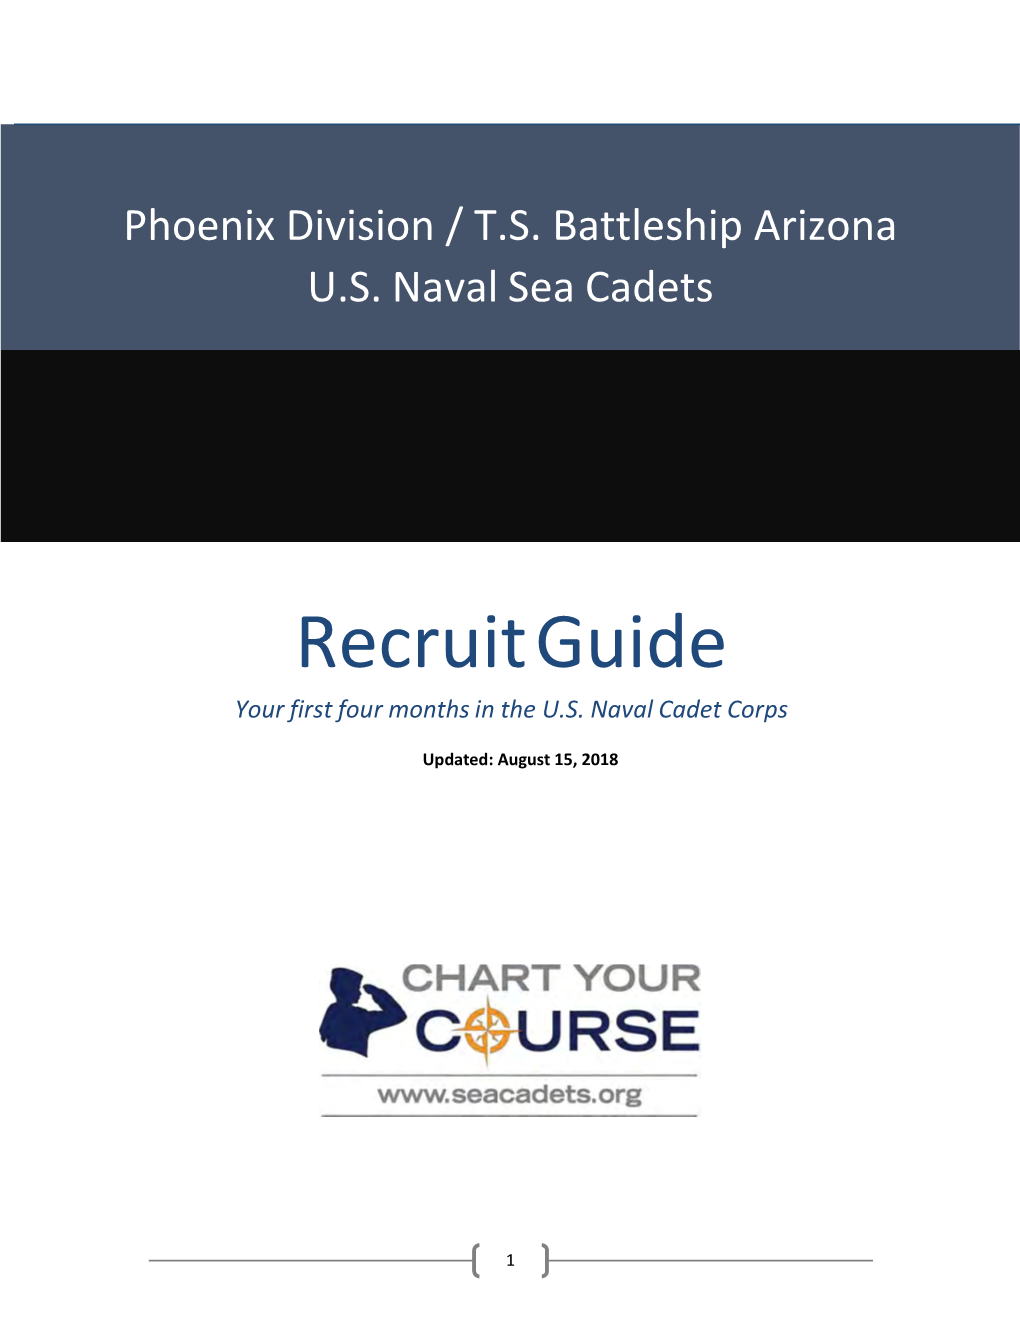 Recruit Guide Your First Four Months in the U.S